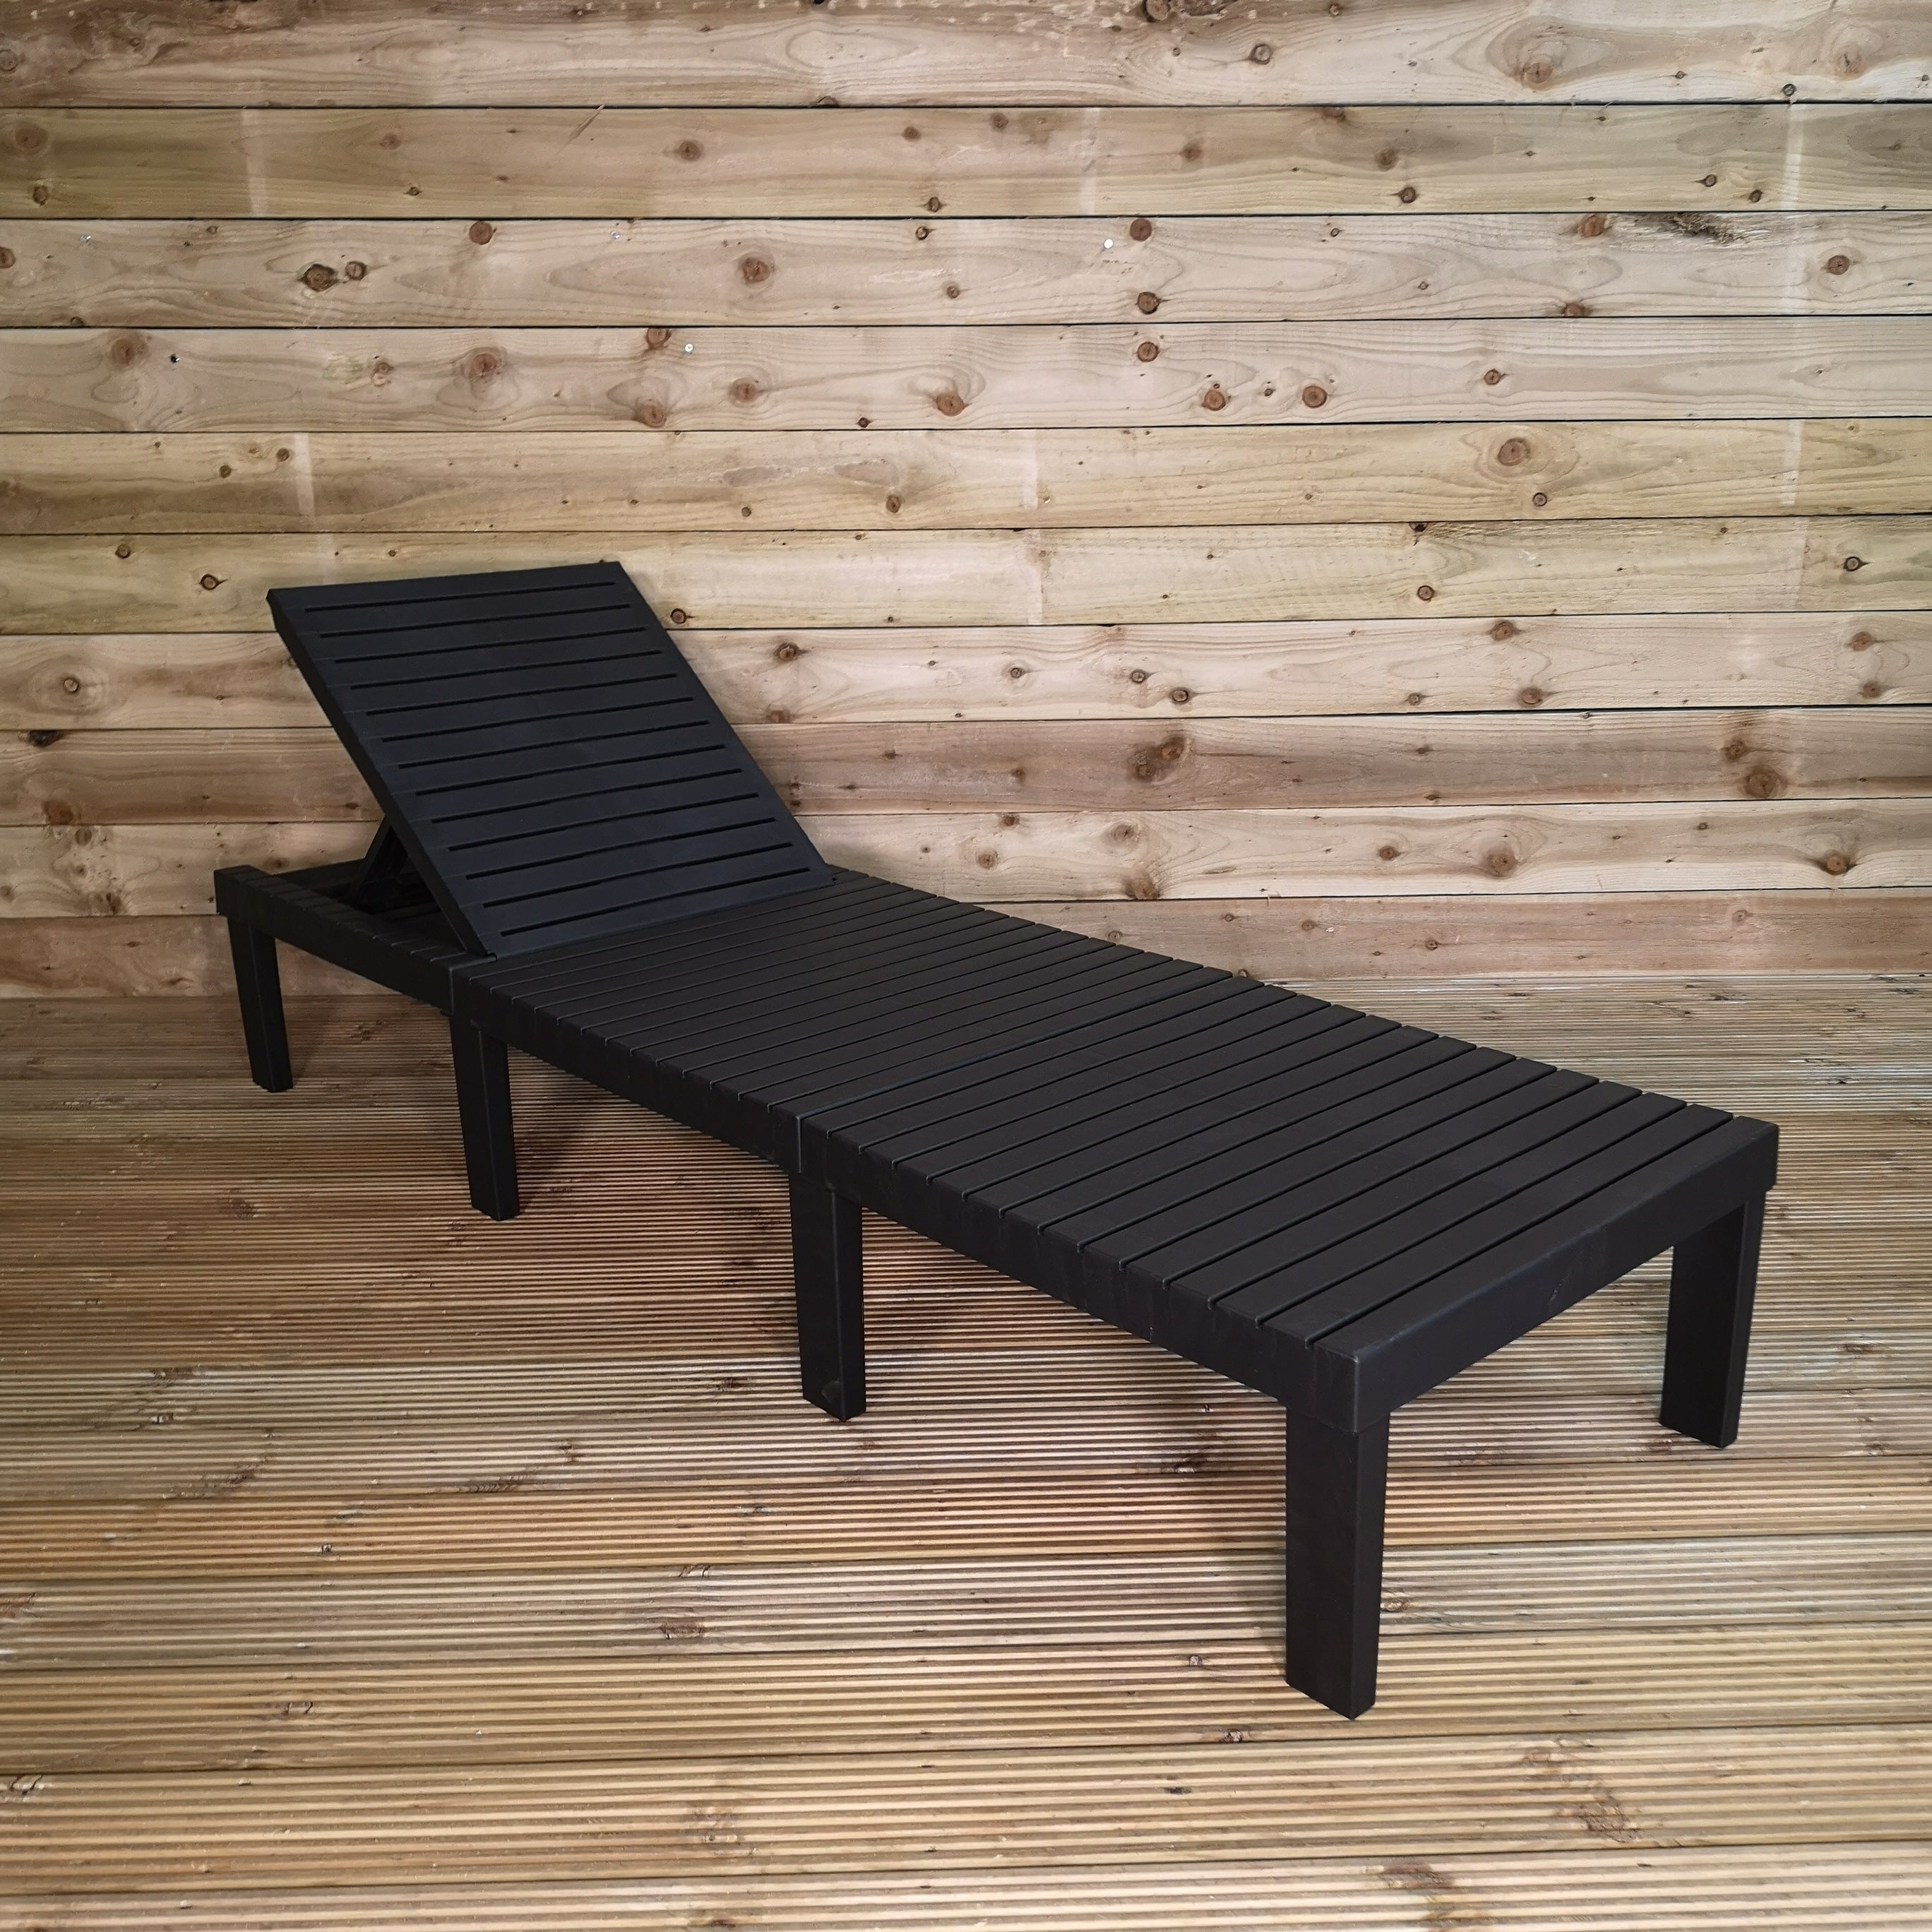 2m Black Modular Lounge Bed / Bench with Grey Cushion Outdoor Garden Furniture